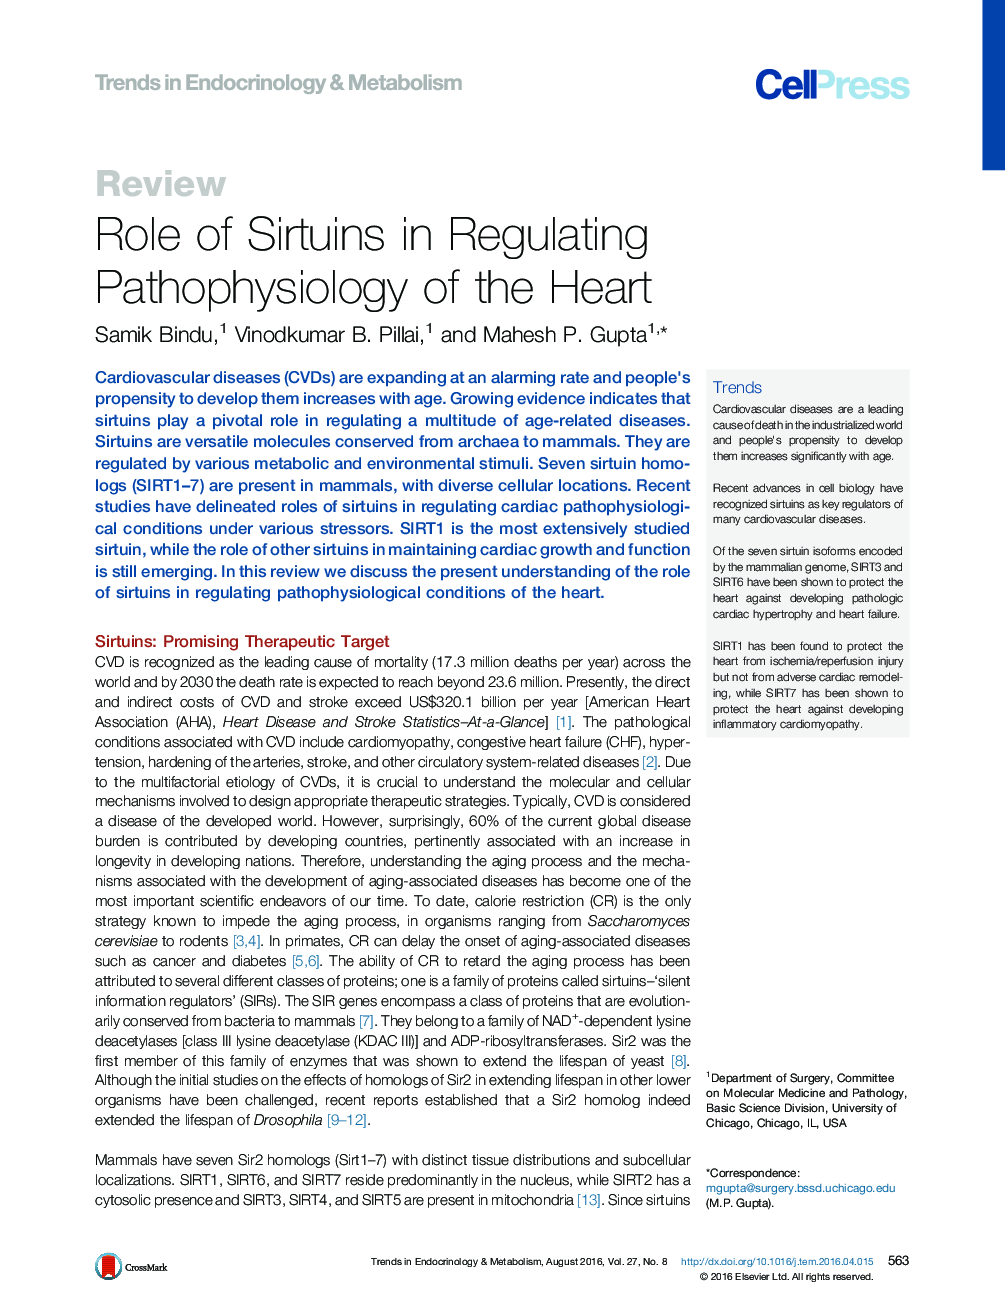 Role of Sirtuins in Regulating Pathophysiology of the Heart